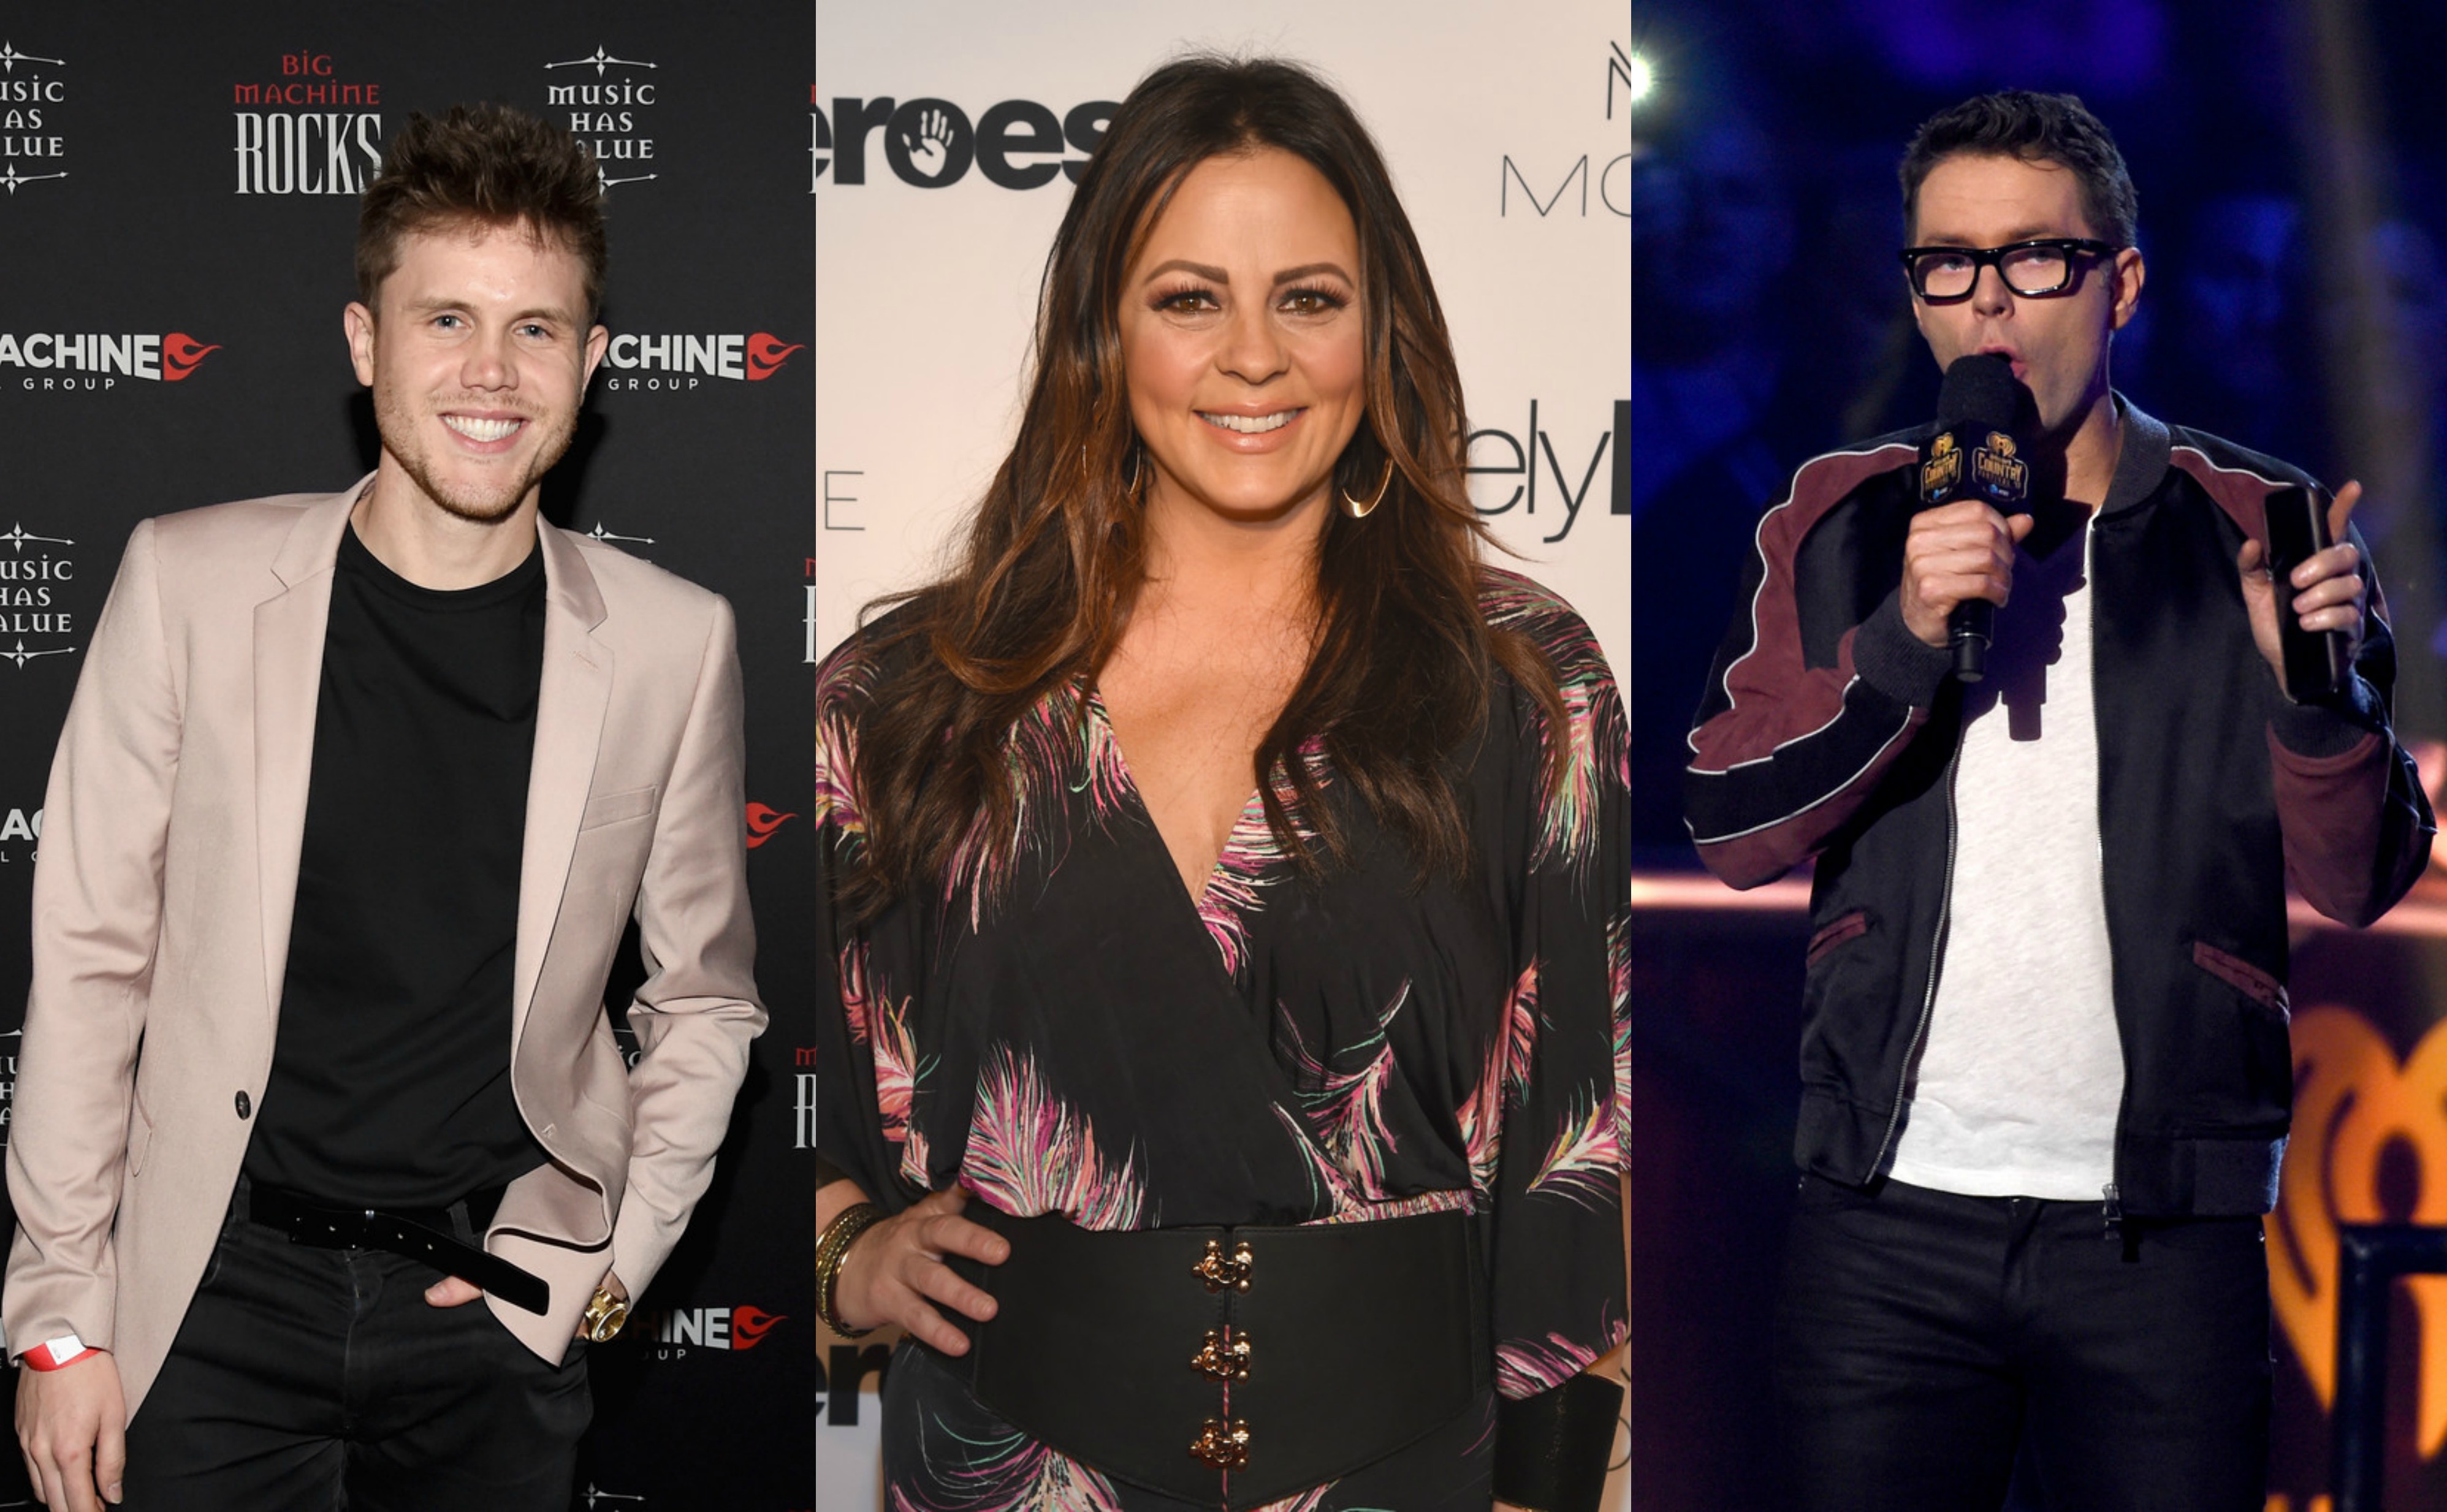 Bobby Bones, Sara Evans, and Trent Harmon Join Lineup for City of Hope Celebrity Softball Game